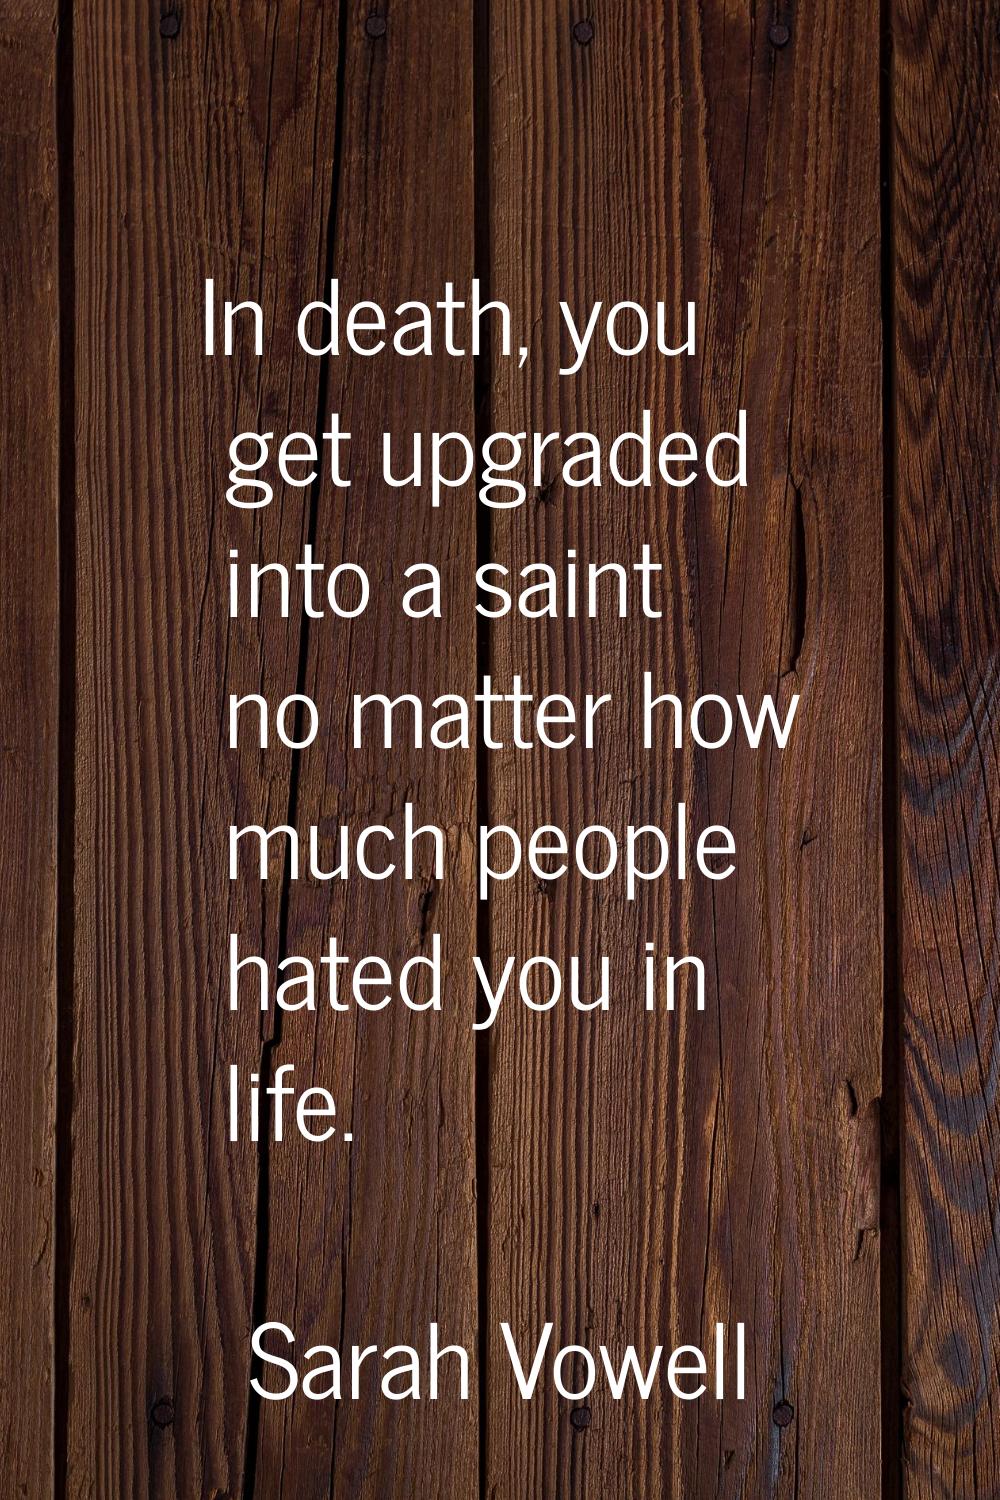 In death, you get upgraded into a saint no matter how much people hated you in life.